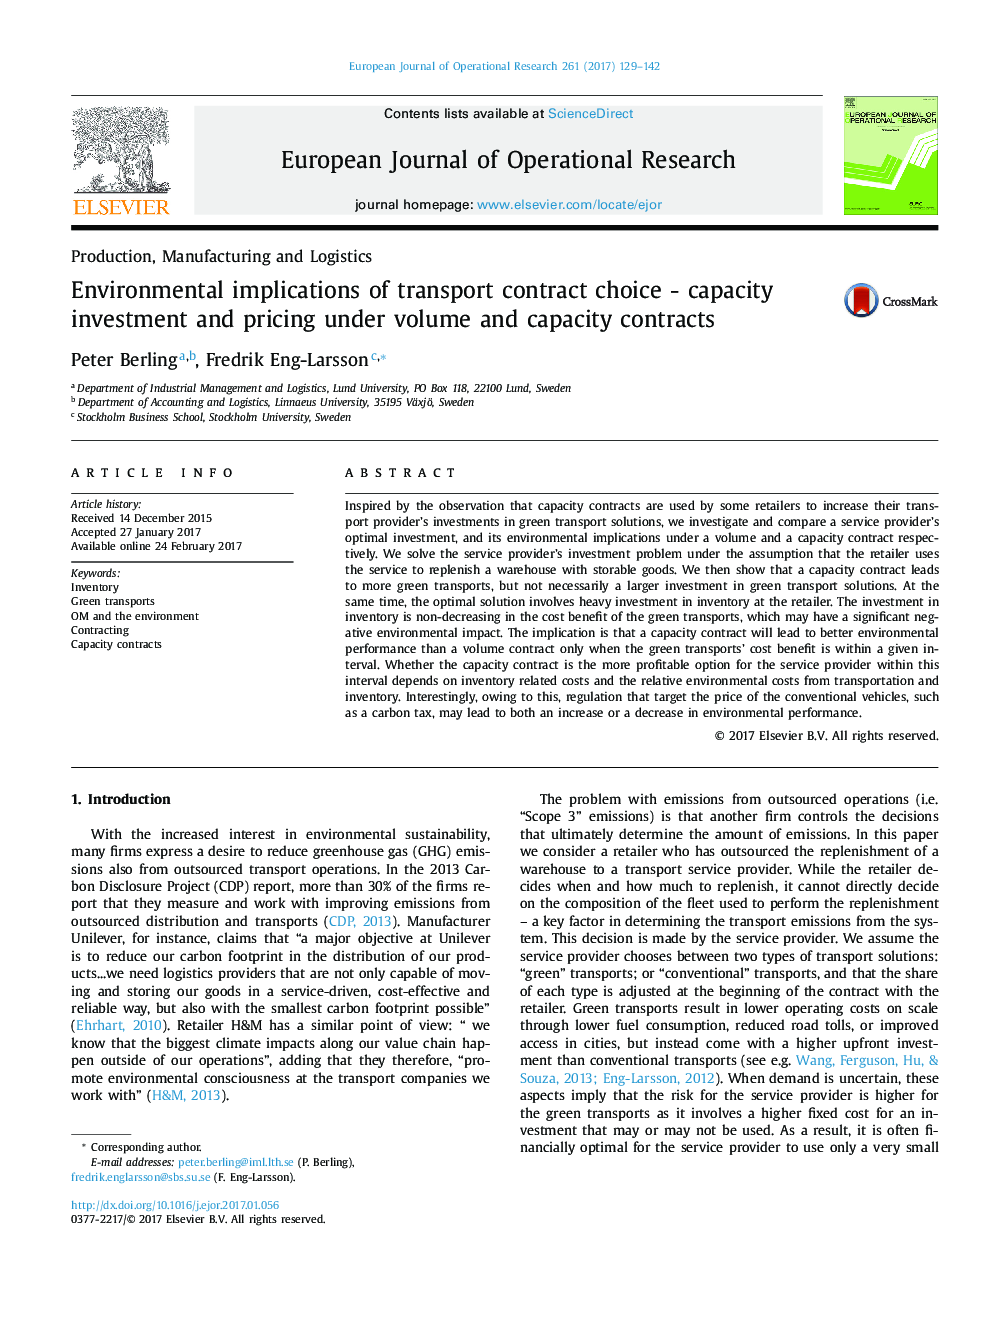 Environmental implications of transport contract choice - capacity investment and pricing under volume and capacity contracts